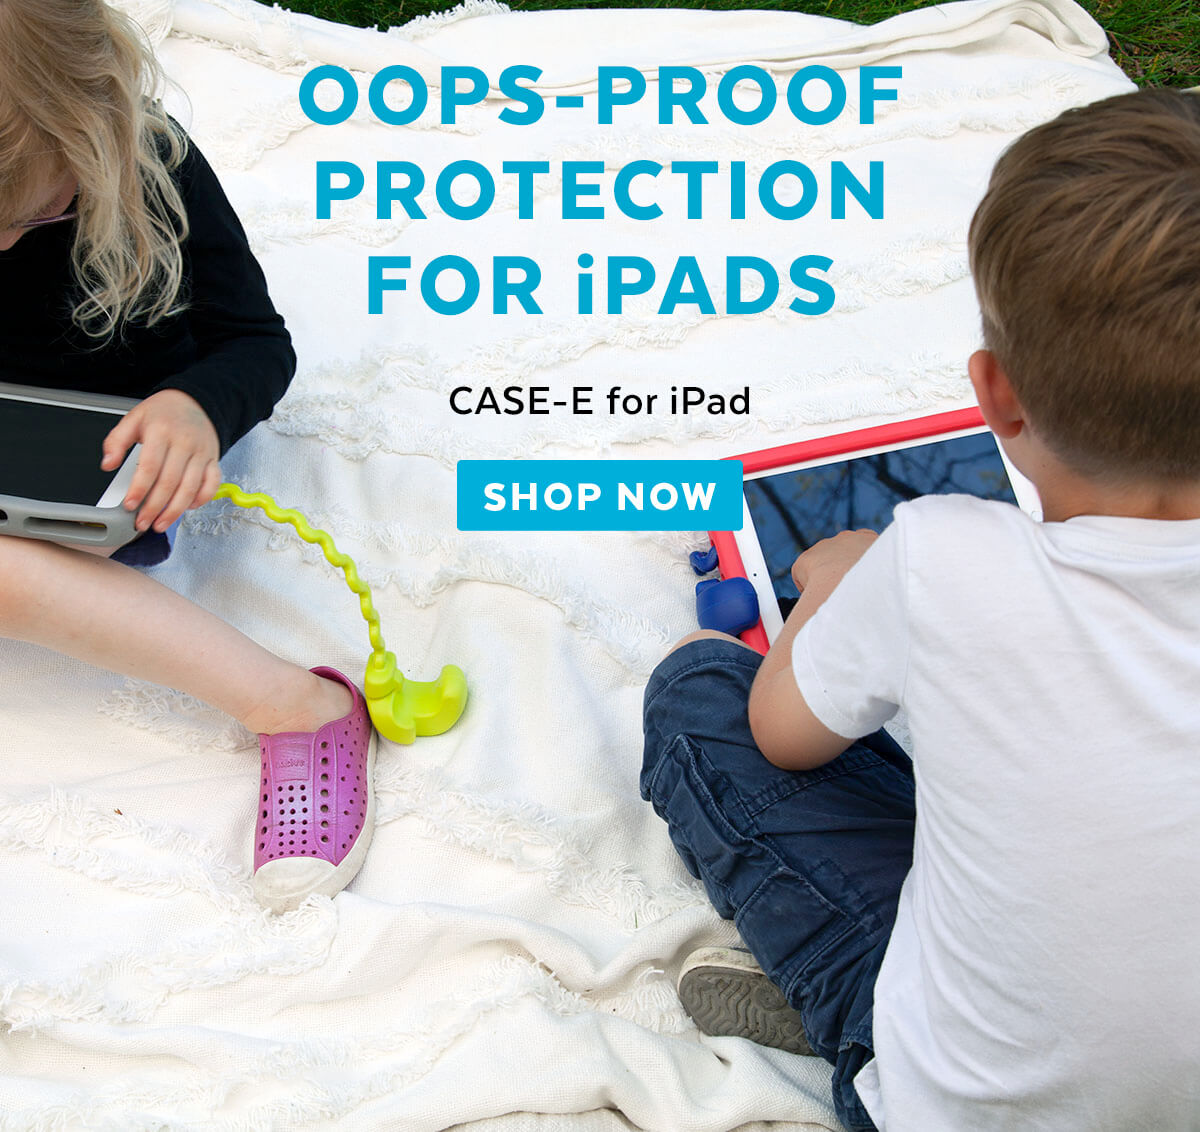 Oops-proof protection for iPads. Case-E for iPad. Shop now.